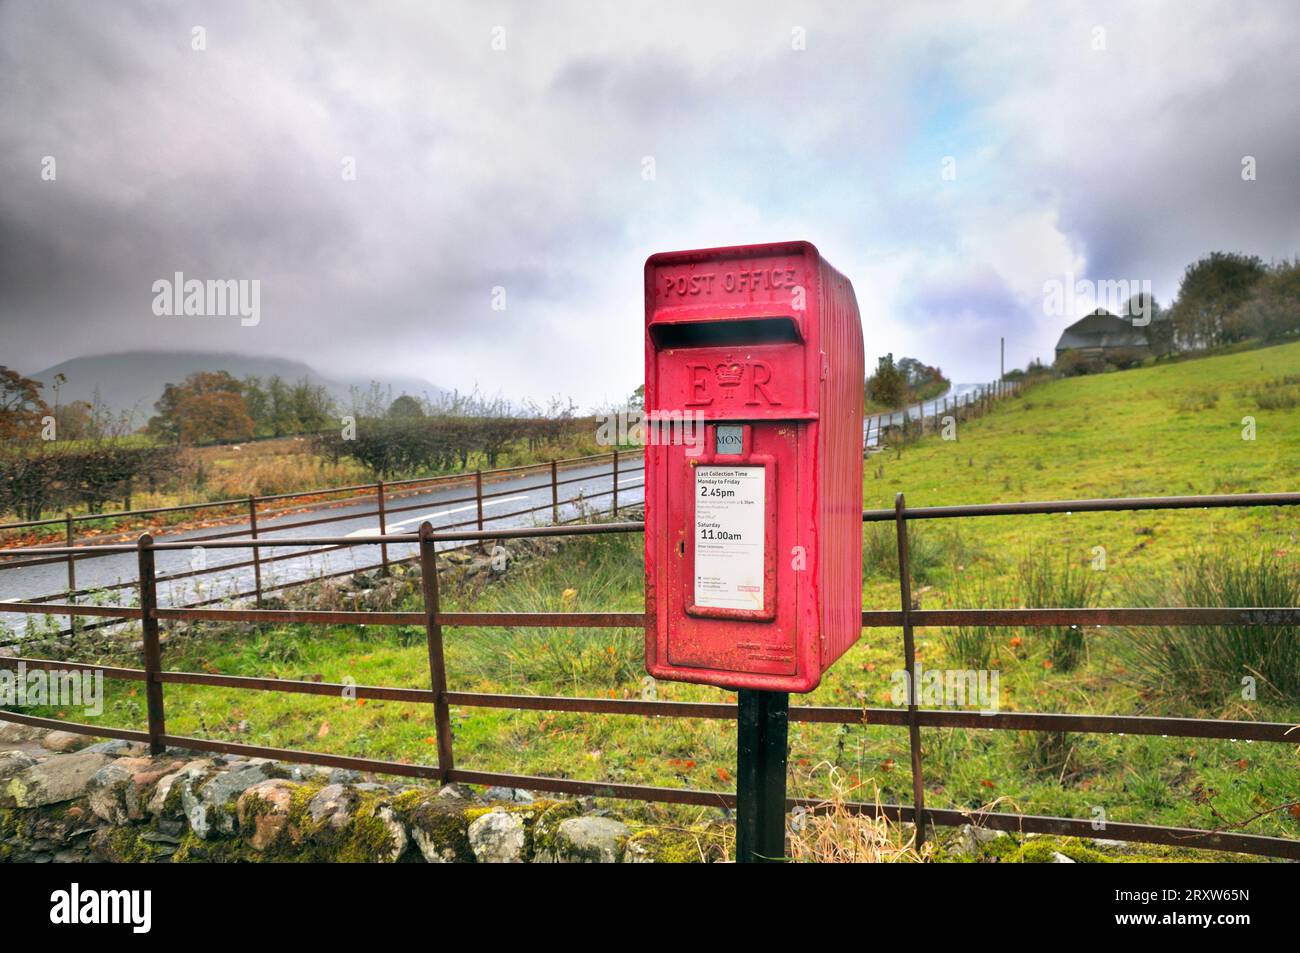 Royal Mail post box in a rural location, UK Stock Photo